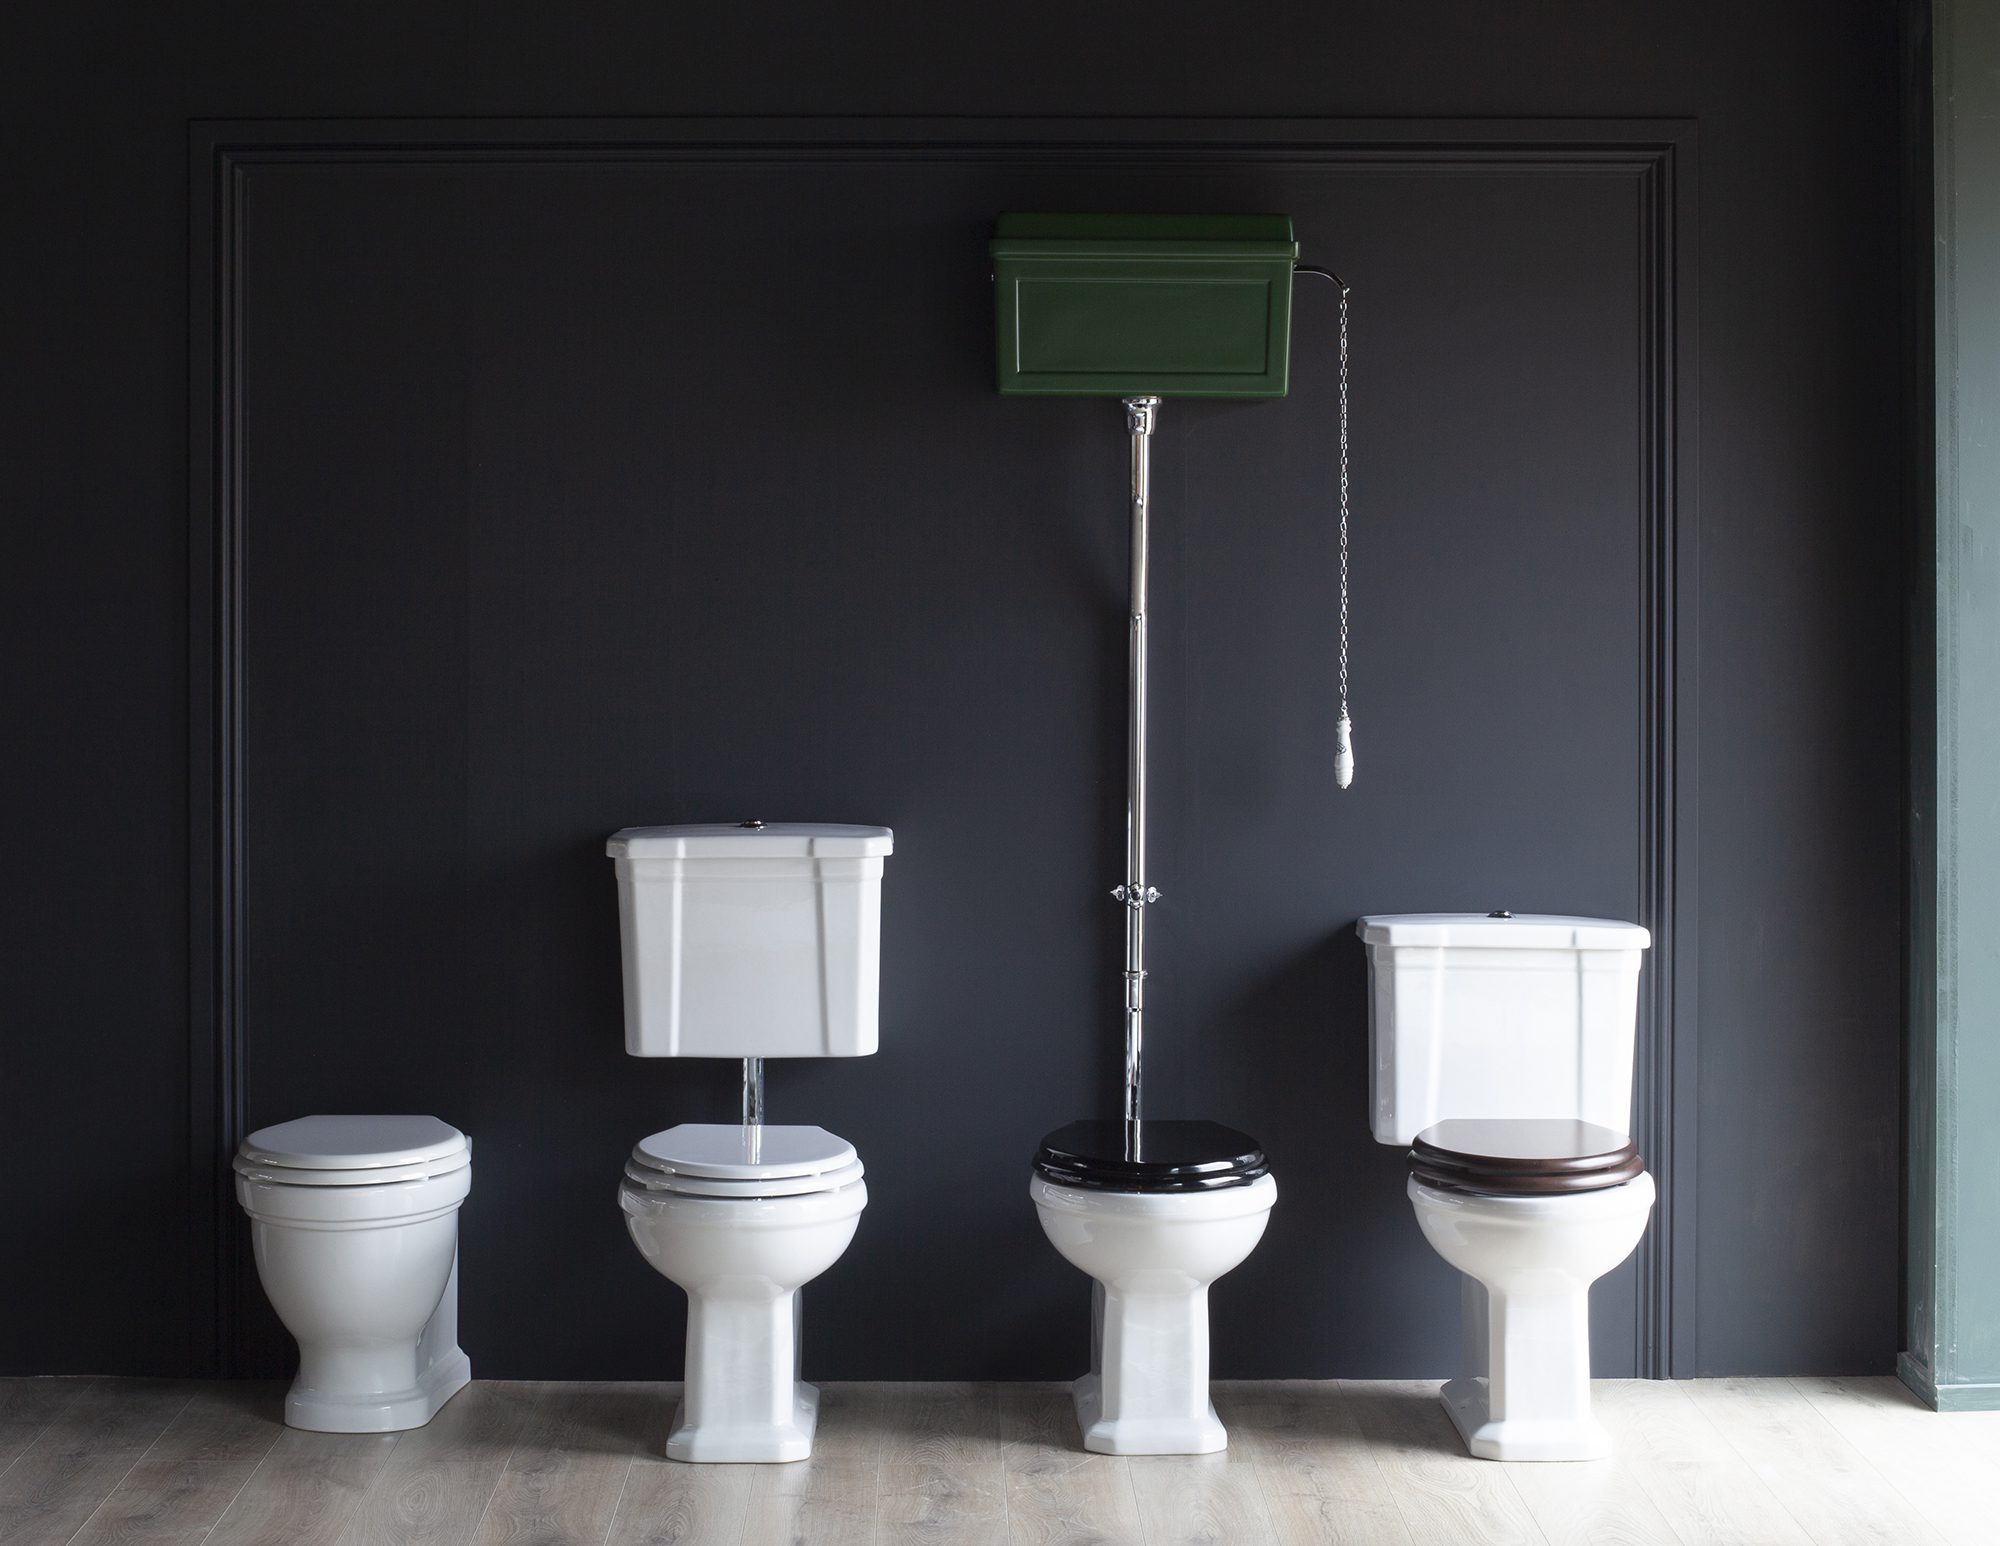 Albion's range of different toilet formats. Back to Wall Toilet, Low Level Toilet, High level Toilet and Close Coupled toilets.